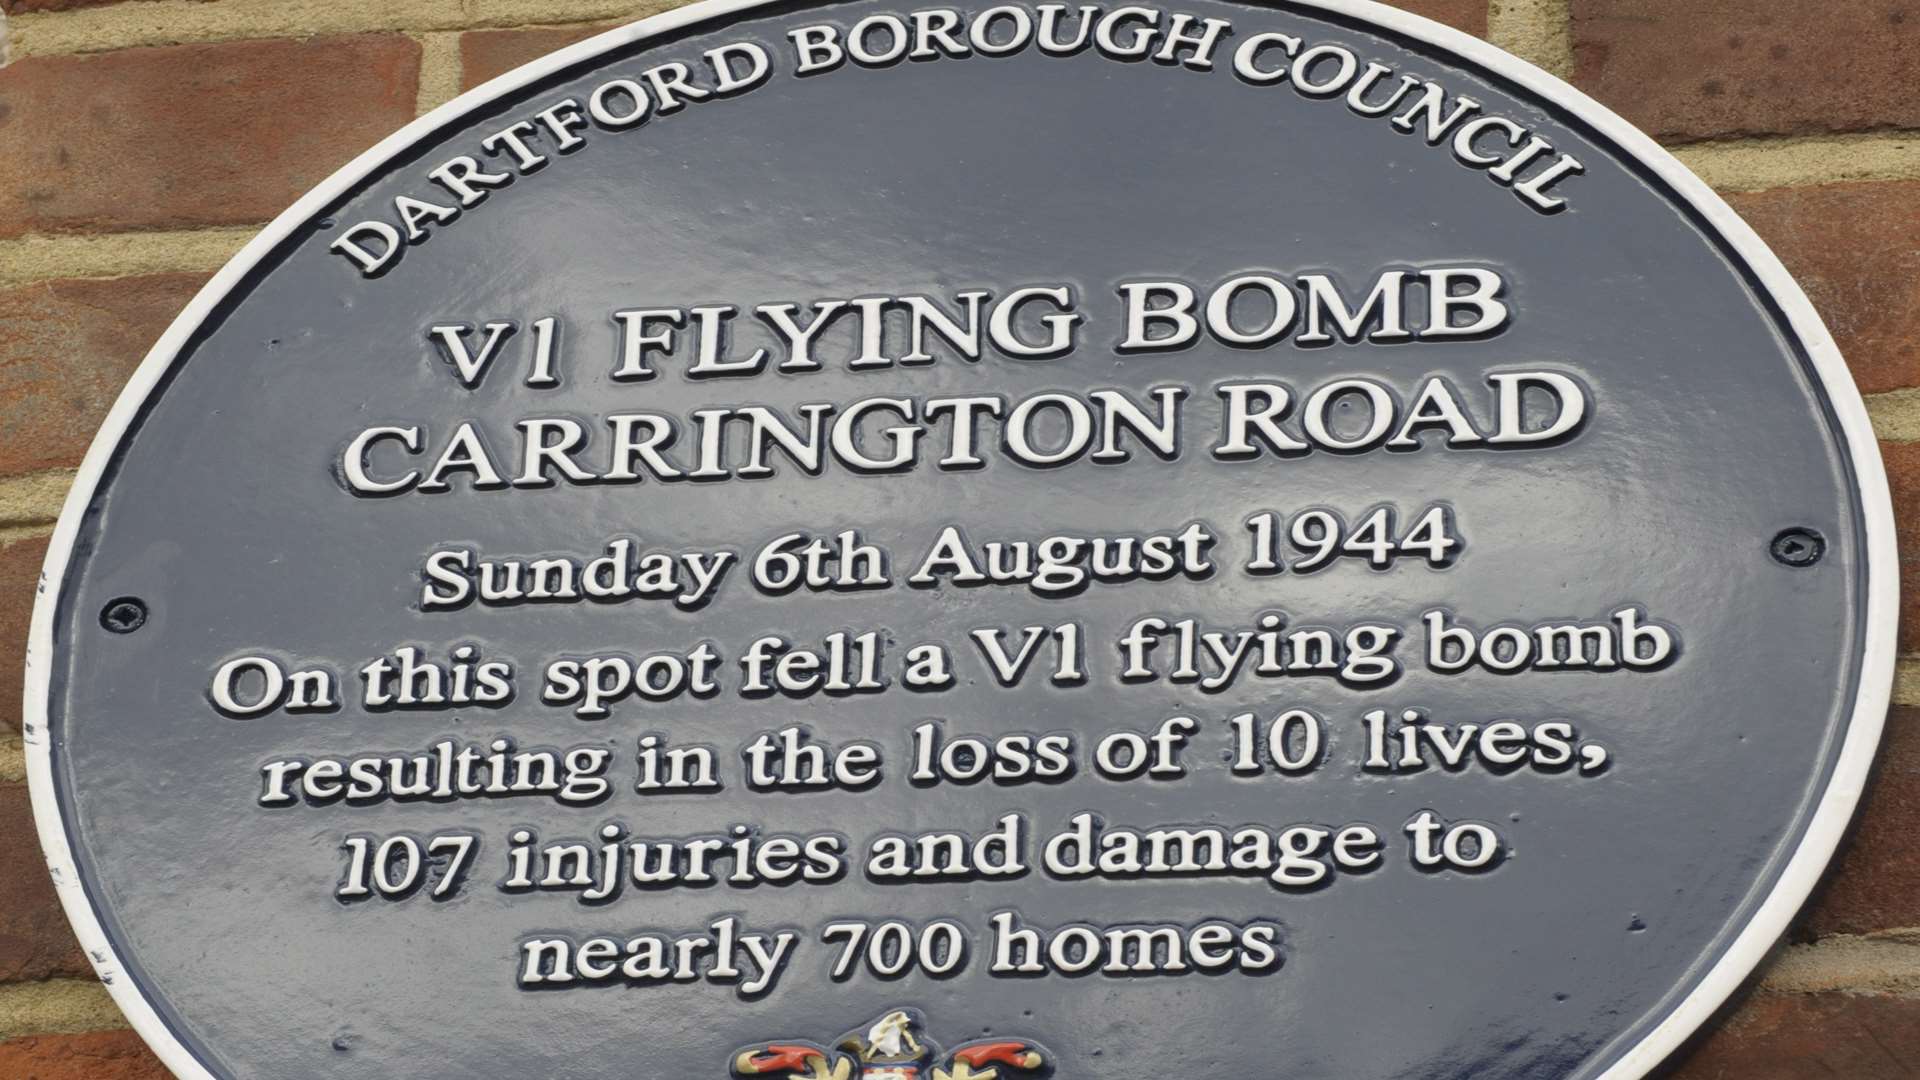 Robert's father and brother's were killed after a bomb hit outside their Dartford home during the Second World War